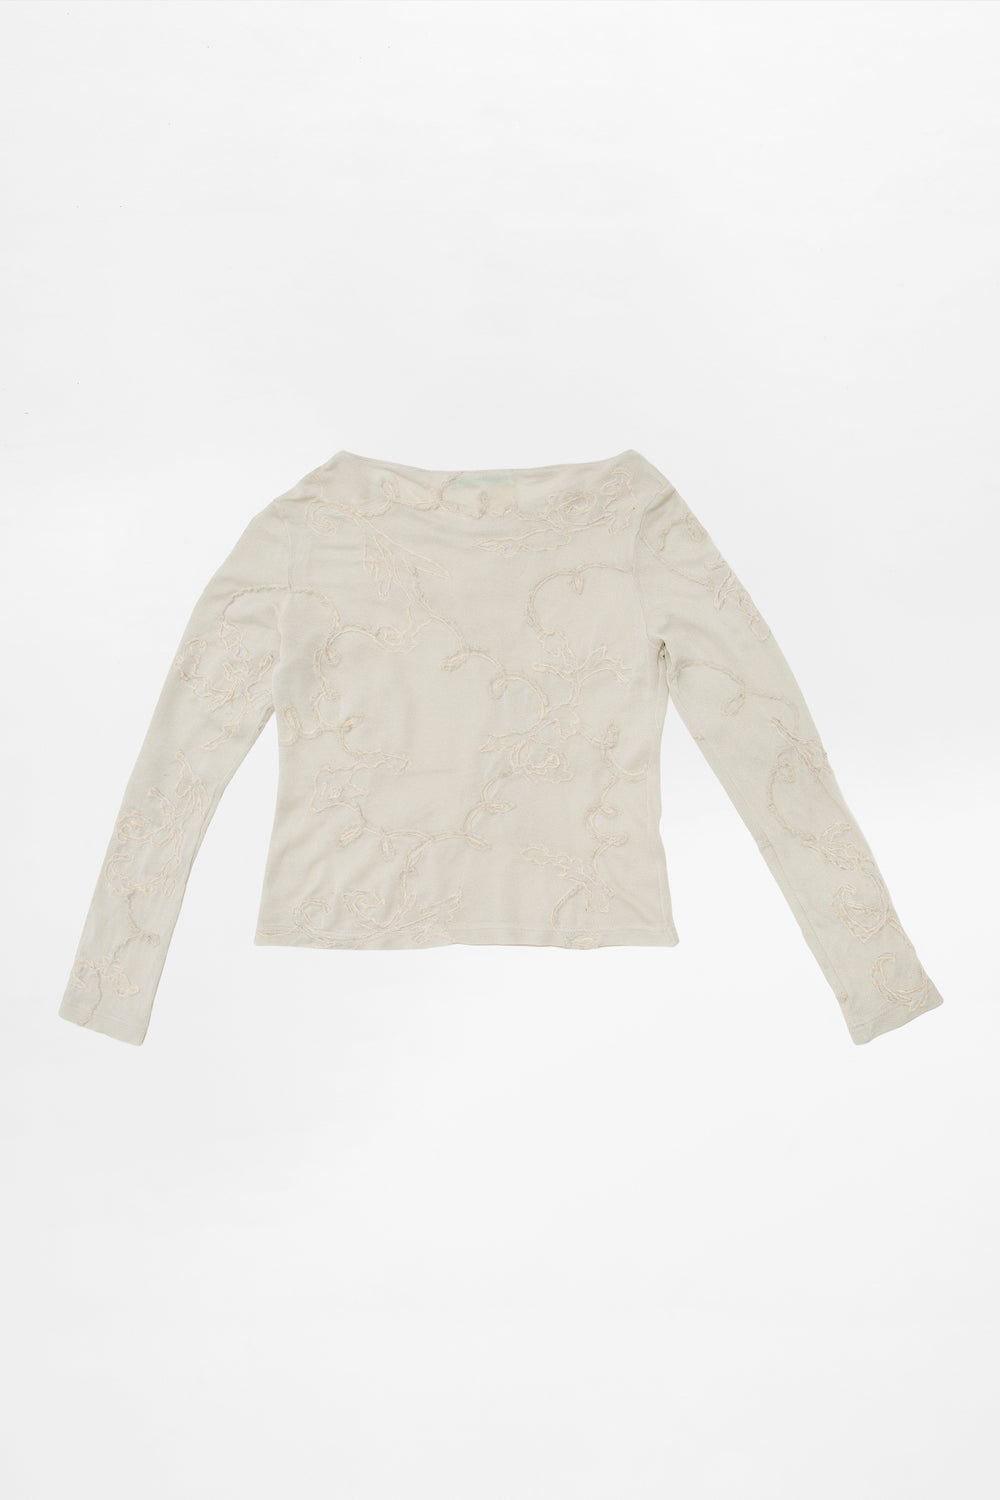 EMBROIDERED WOOL DRAWINGS LONG SLEEVE (made to order)